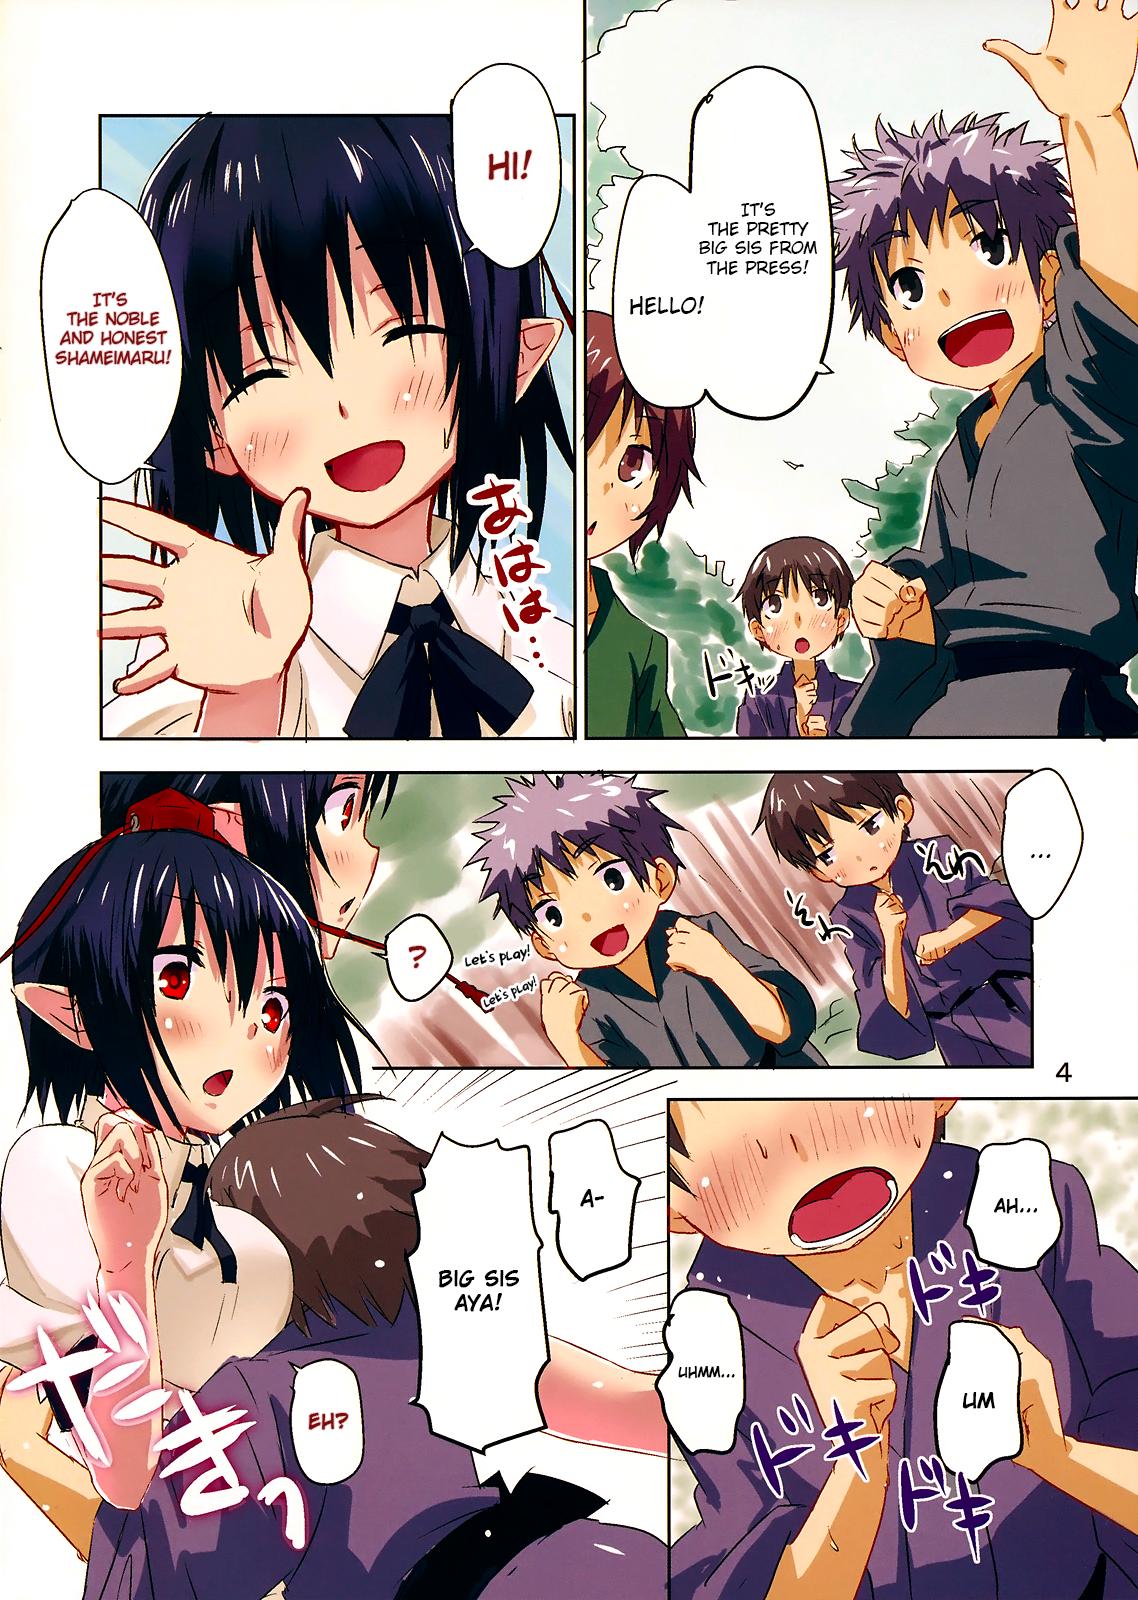 Assfucking NEWS DAILY EXTRA - Touhou project Gay Bukkakeboys - Page 3